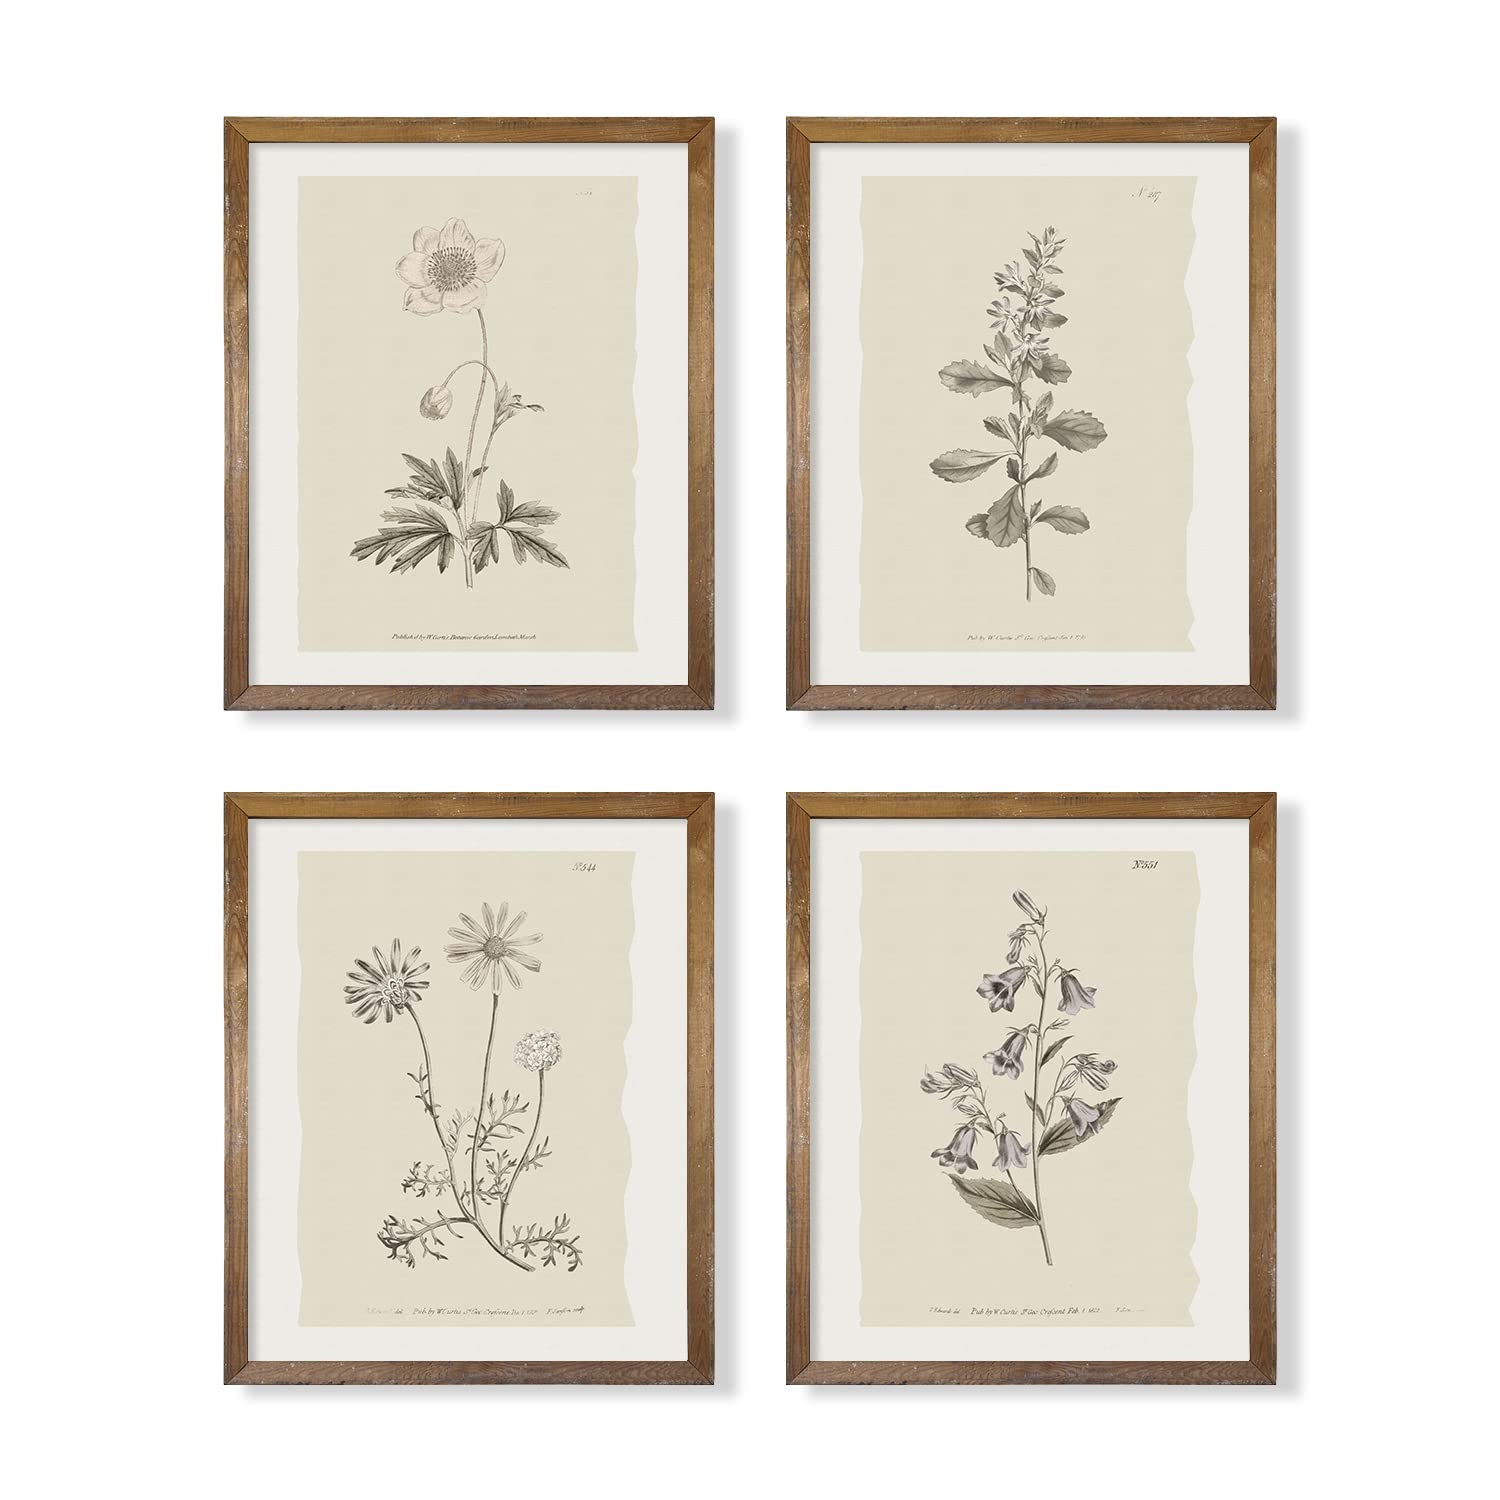 Vintage Botanical Plant Wall Art Prints - Neutral Boho Minimalist Flower Floral Posters Picture for Bathroom, Kitchen, Home Office - Beige French Counry Farmhouse Room Decor - Aesthetic Study Sketch